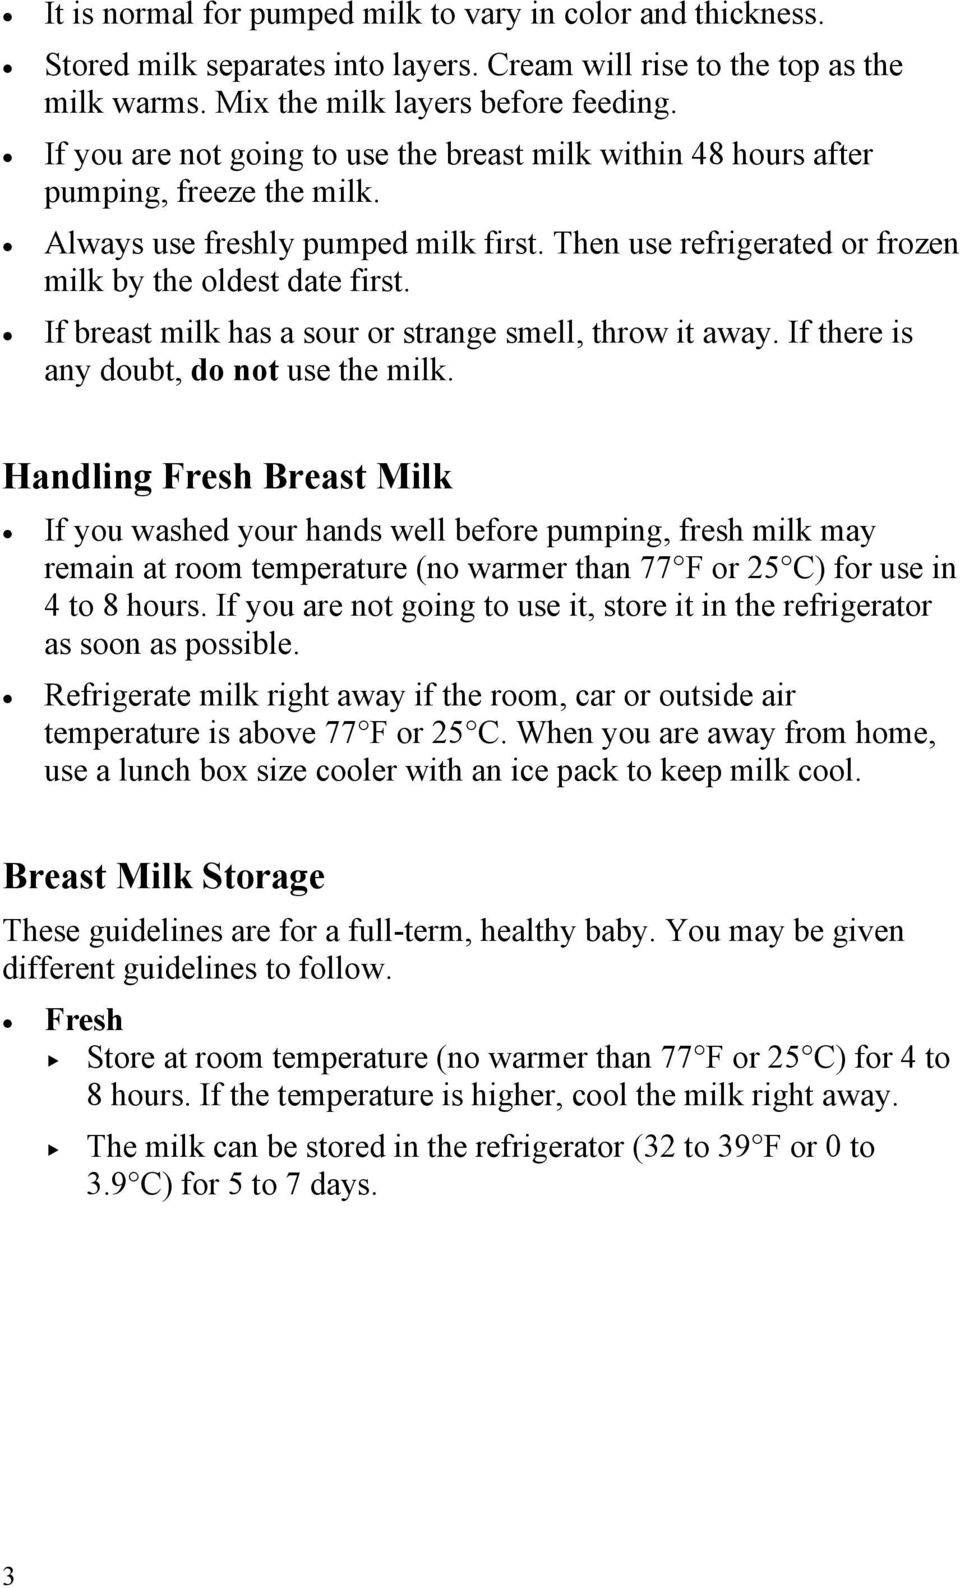 If breast milk has a sour or strange smell, throw it away. If there is any doubt, do not use the milk.